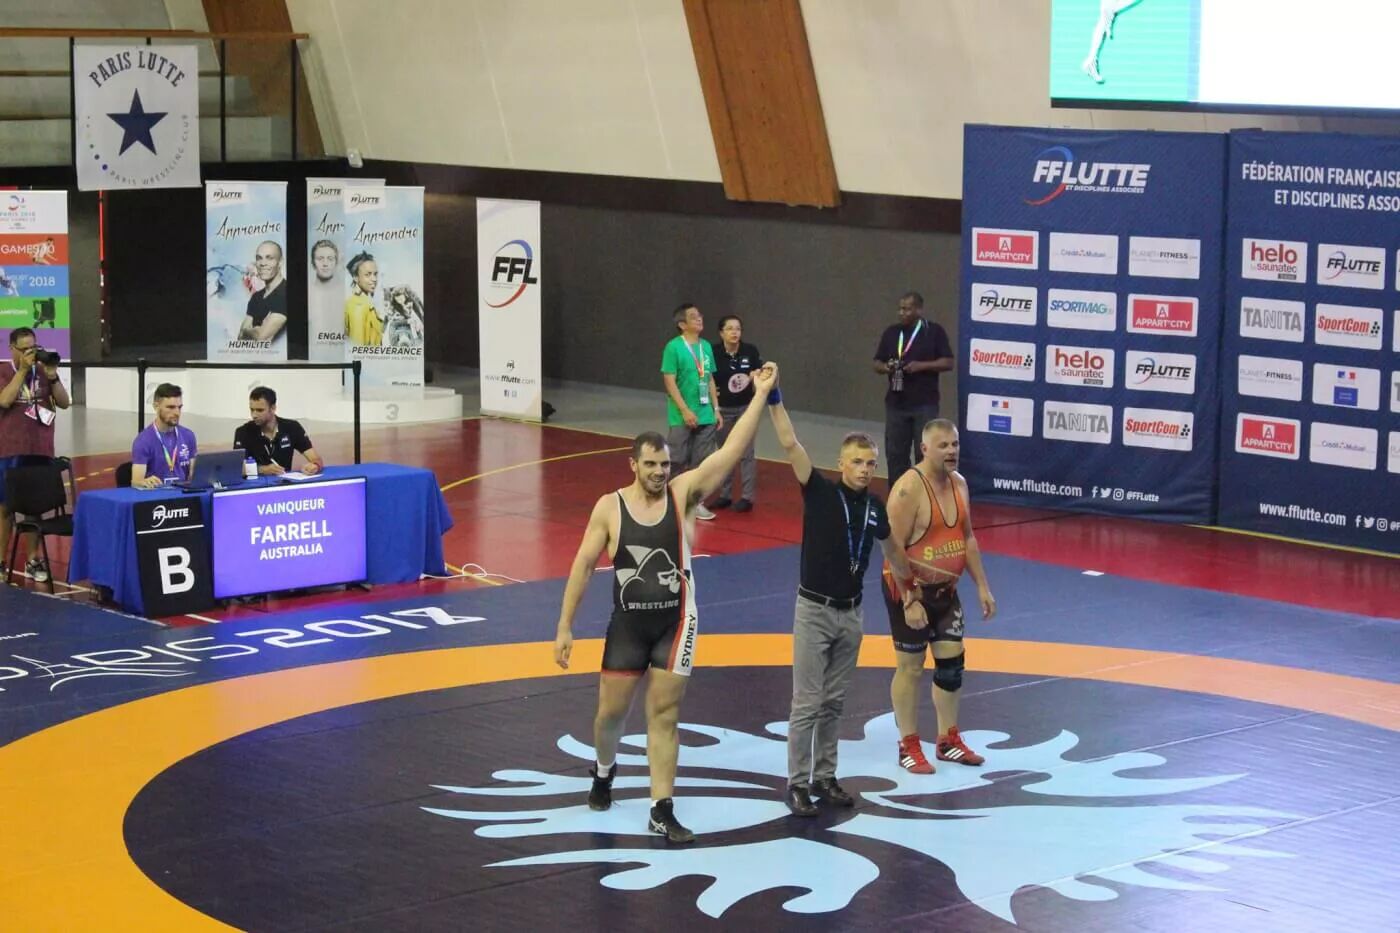 Wrestling referee holds the winner's hand at the end of the match.